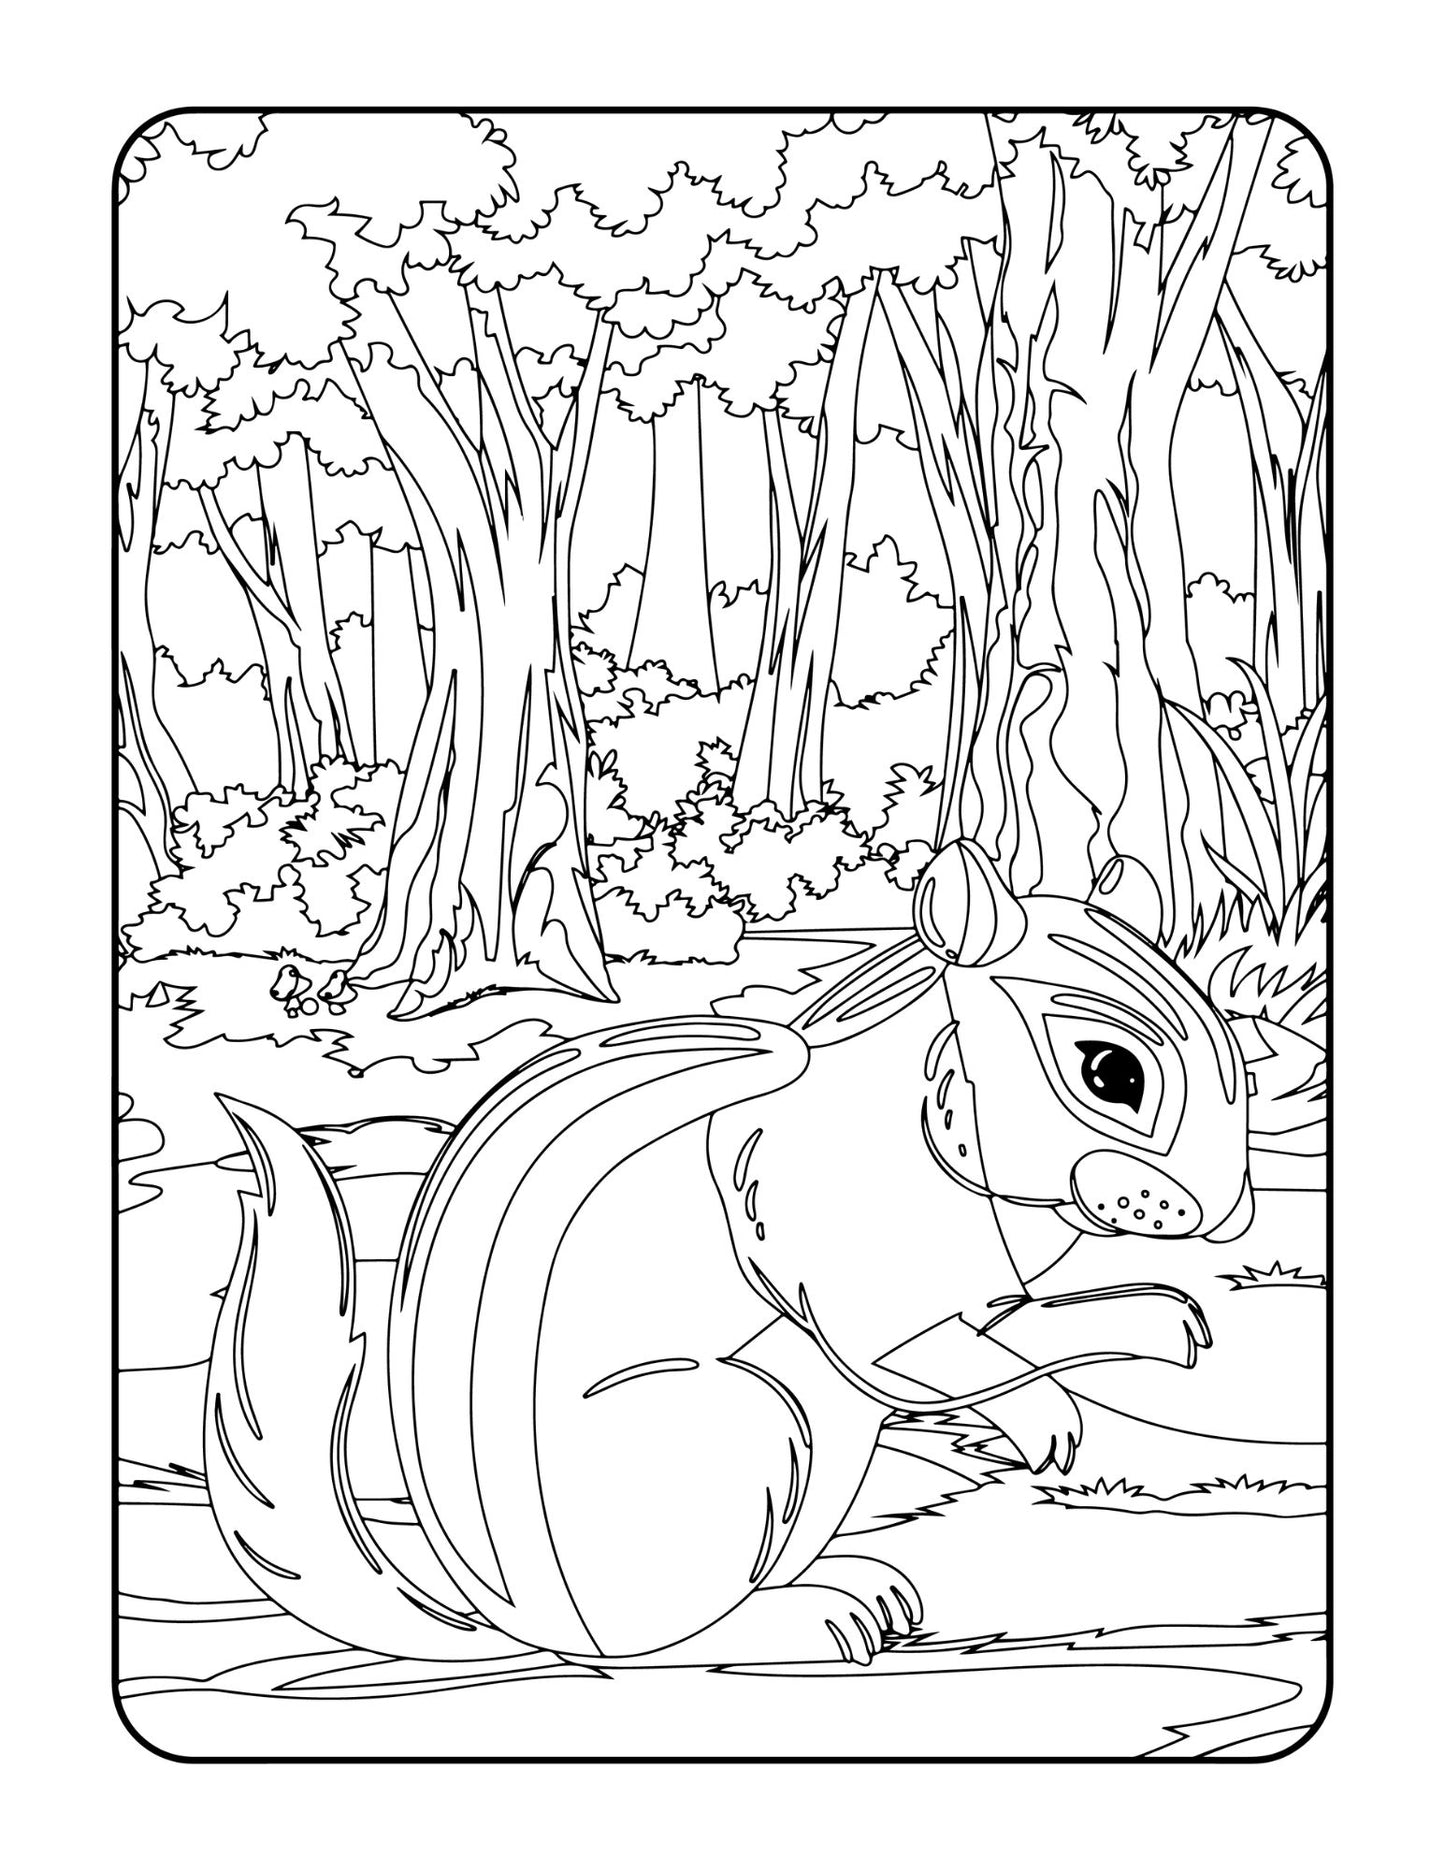 Forest Animals Coloring Book for Kids Adults Coloring Book Gift Coloring Pages Kids Colouring Book for Kids Coloring Pages Gift for Adults